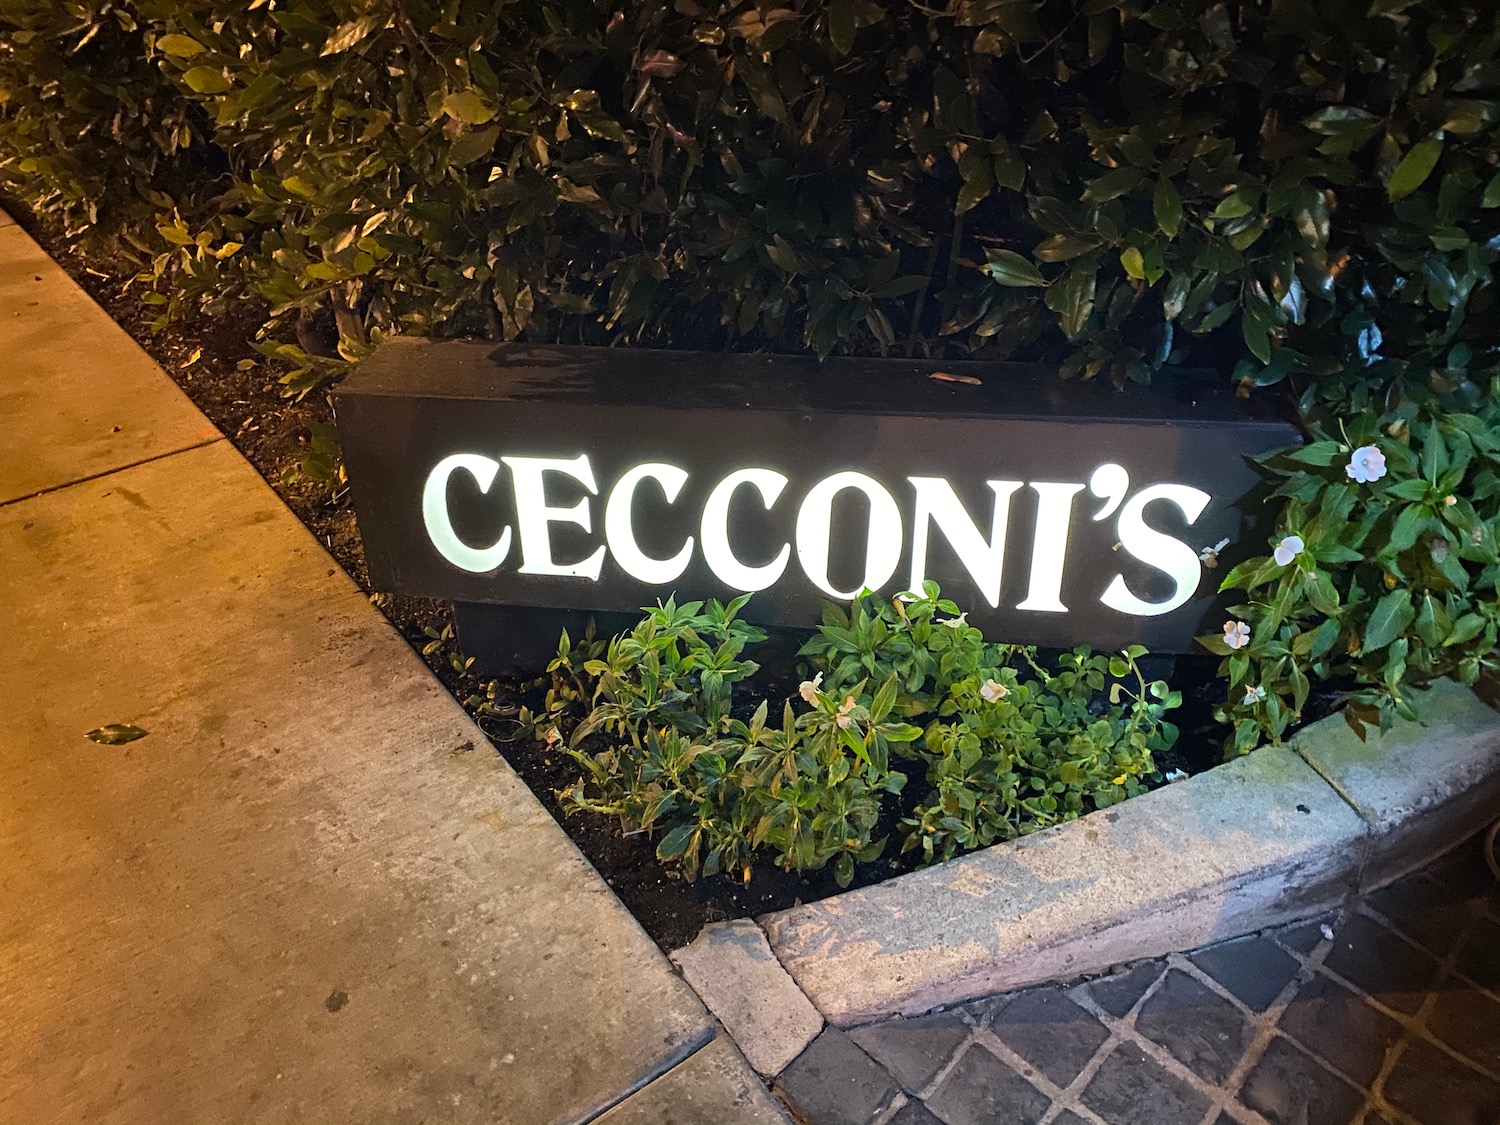 a sign with a lit up sign in front of a bush